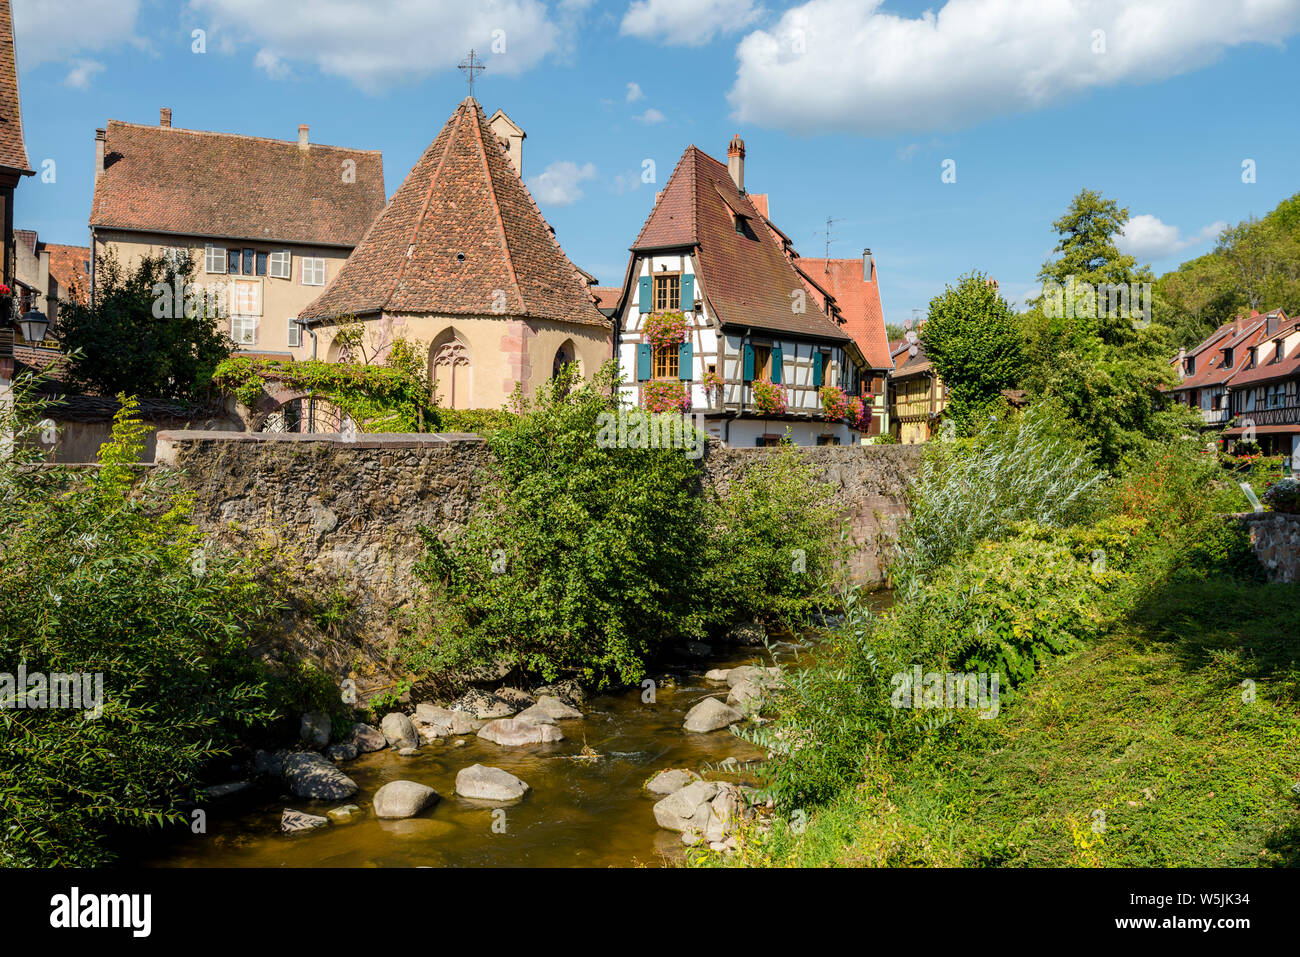 Chapelle de l'Oberhof in the medieval center of the village Kaysersberg, Alsace, Wine Route, France, old half-timbered houses at the brook side Stock Photo